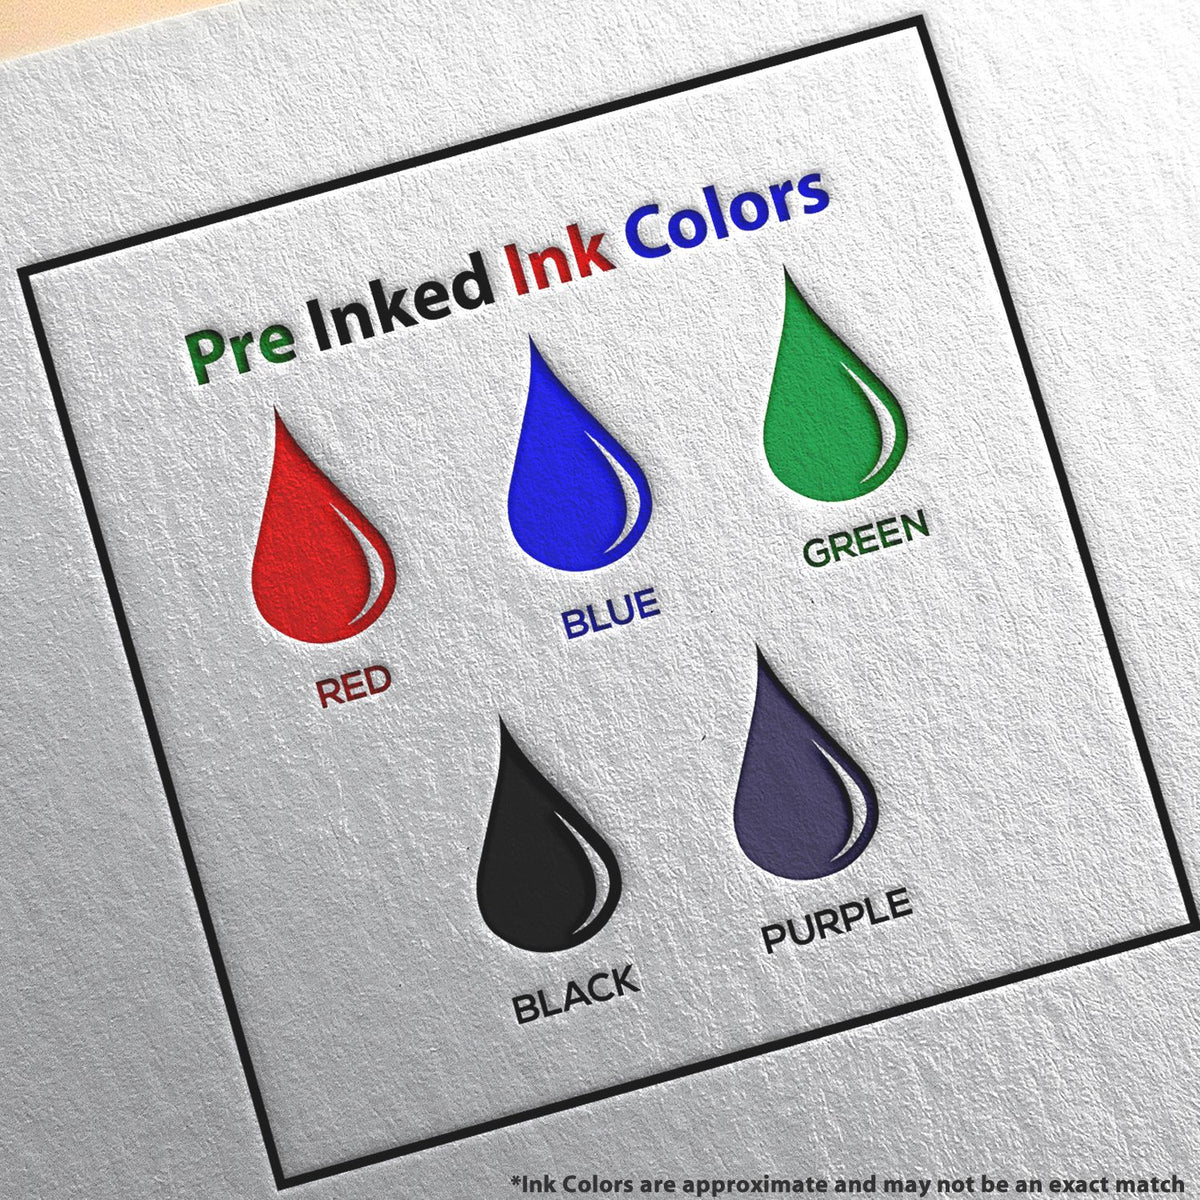 A picture showing the different ink colors or hues available for the Premium MaxLight Pre-Inked Indiana Landscape Architectural Stamp product.